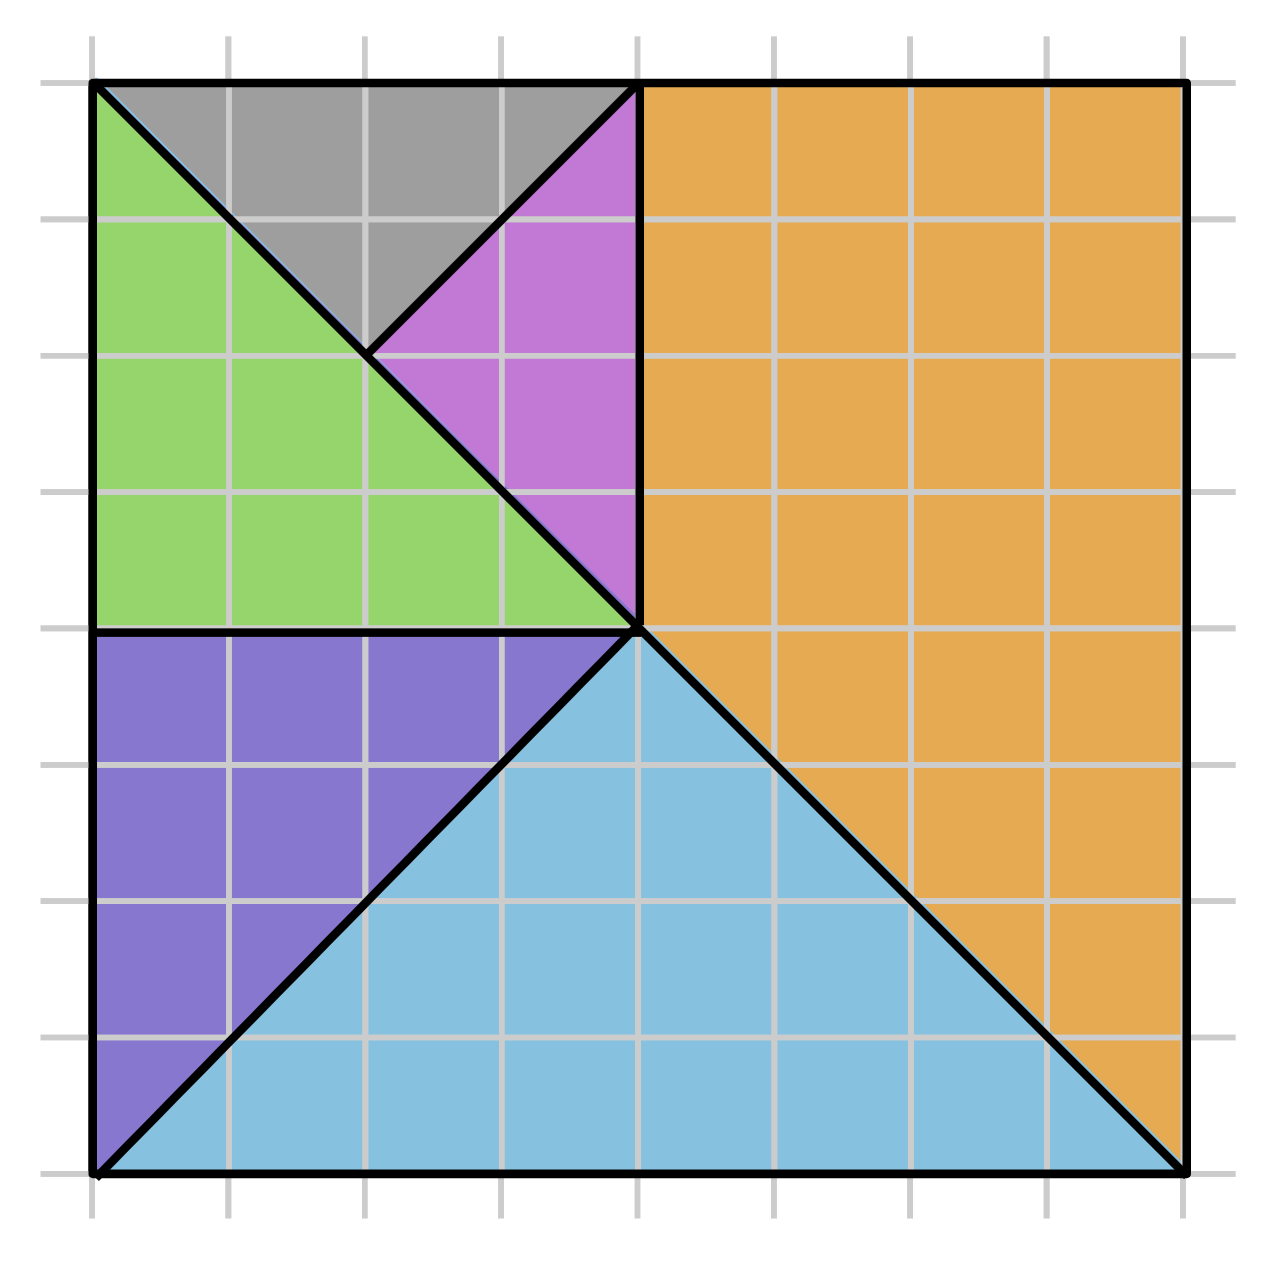 An image of a series of differently sized triangles drawn within a square.